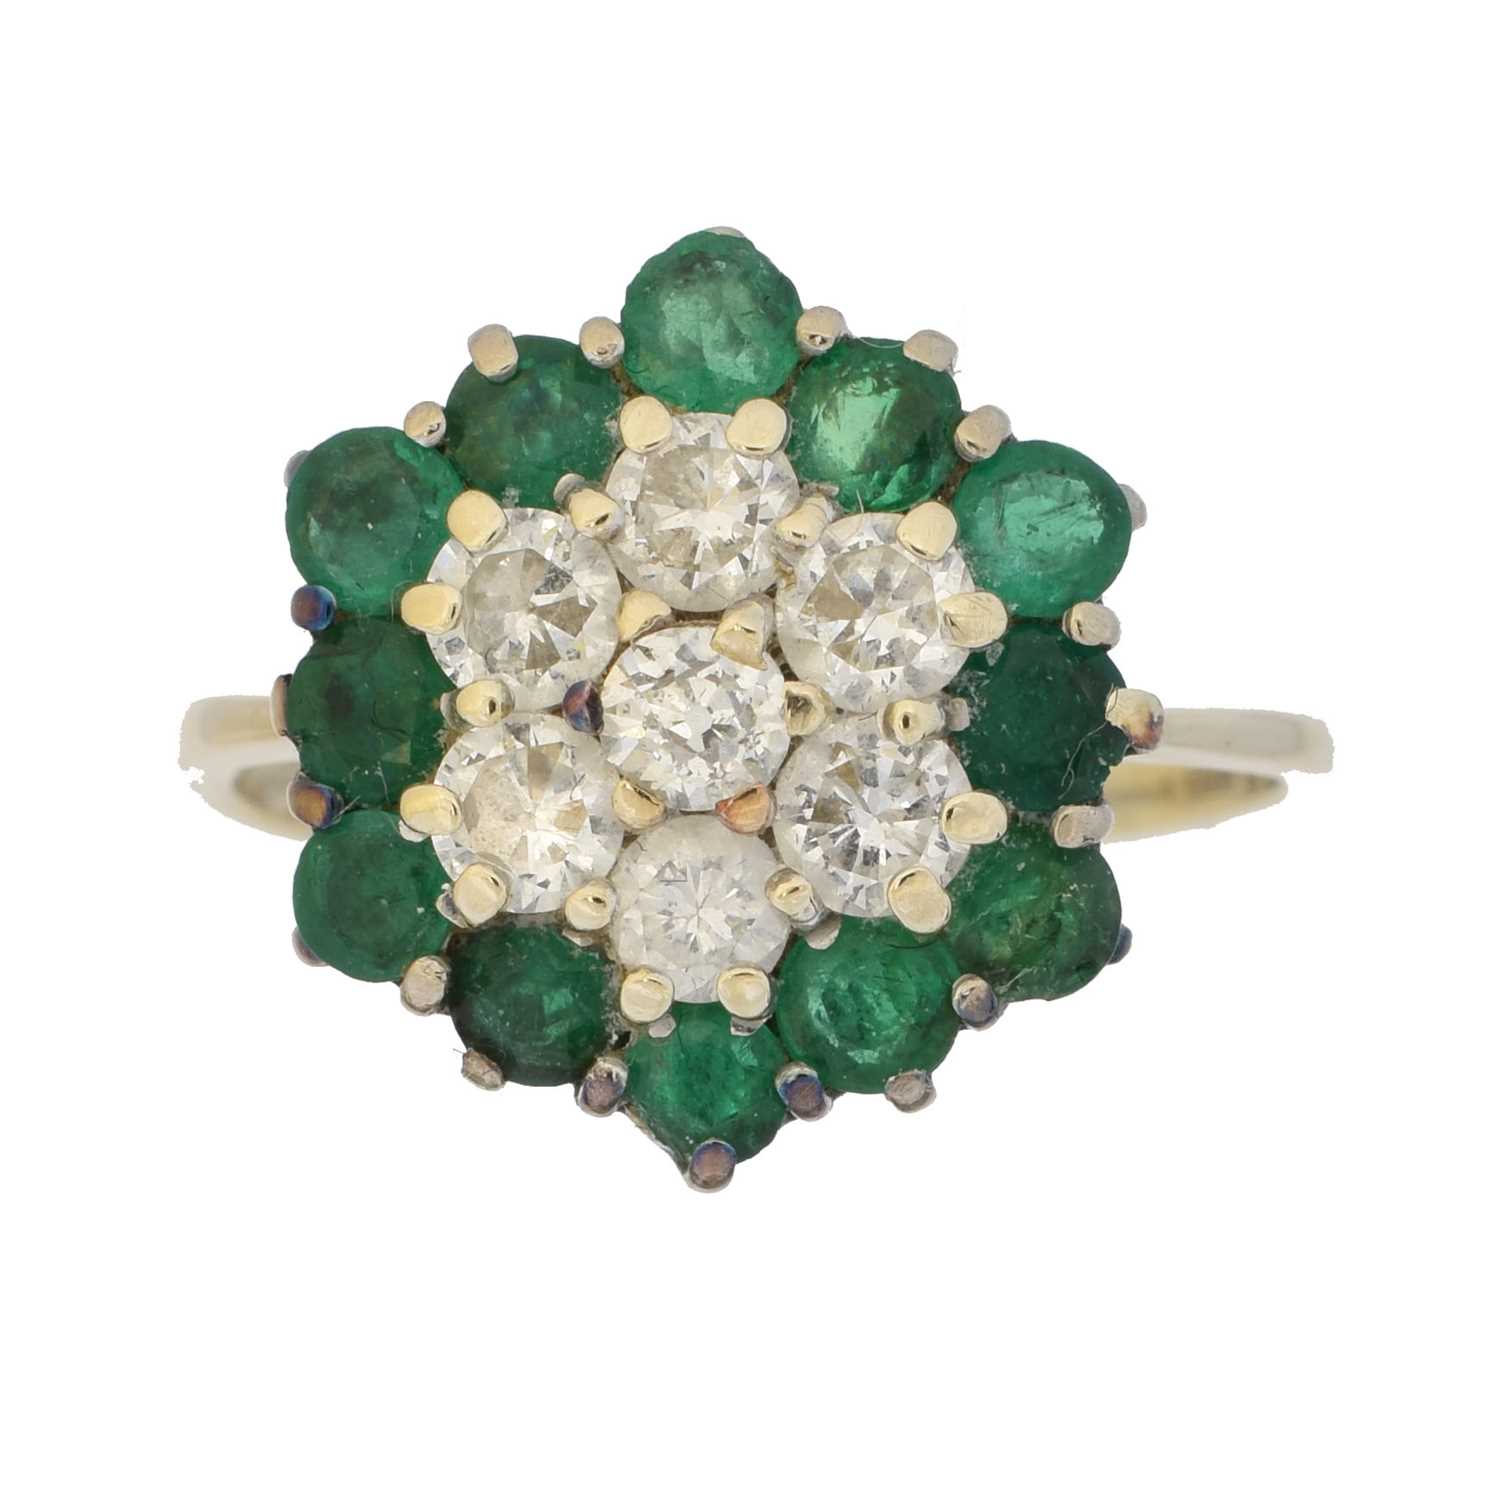 Lot 199 - An 18ct gold emerald and diamond cluster ring by Mappin & Webb